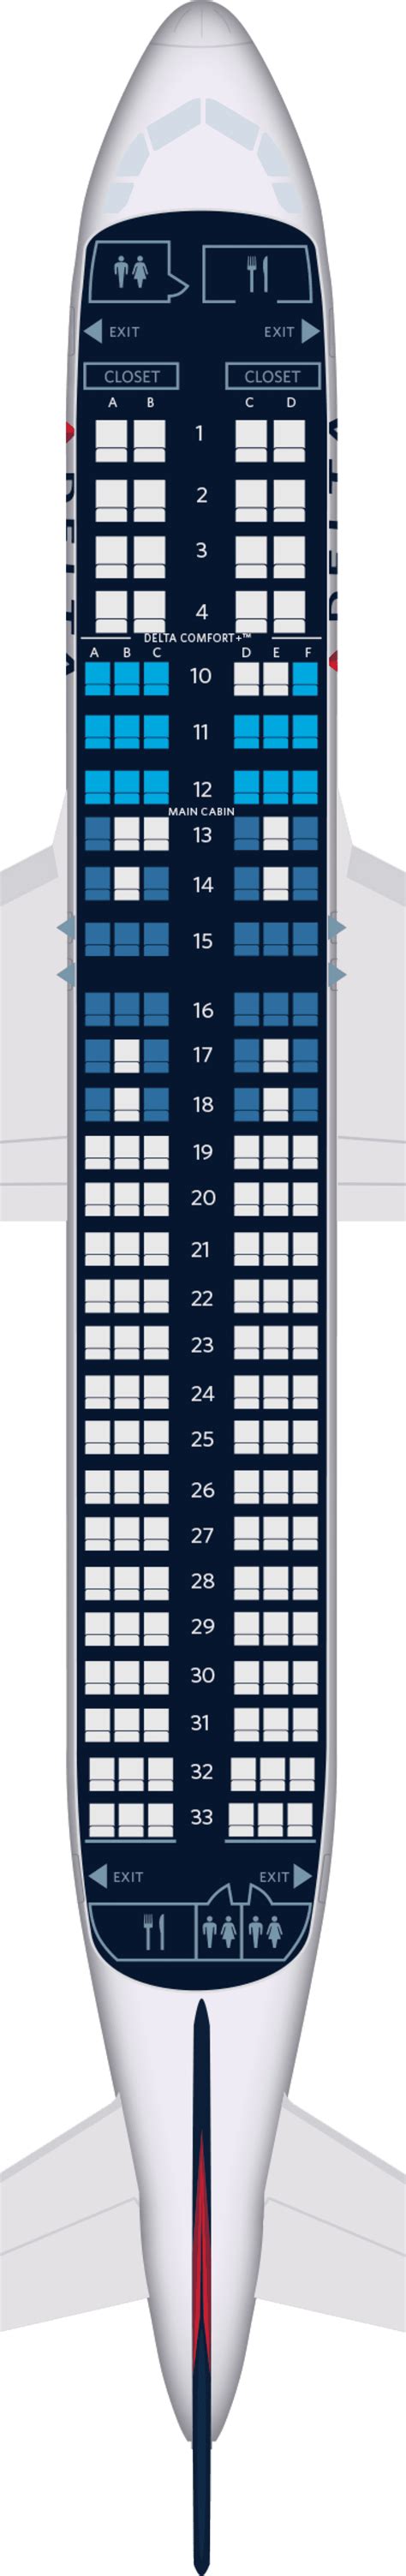 Airbus 320 seat plan. Economy. 29. 18. 186 standard seats. In-flight amenities. Food. EasyJet does not provide complimentary meals or beverages on board its flights. Passengers may purchase items on board from the easyJet shop. Products include sandwiches, hot meals, snacks, soft drinks, and alcoholic drinks. 